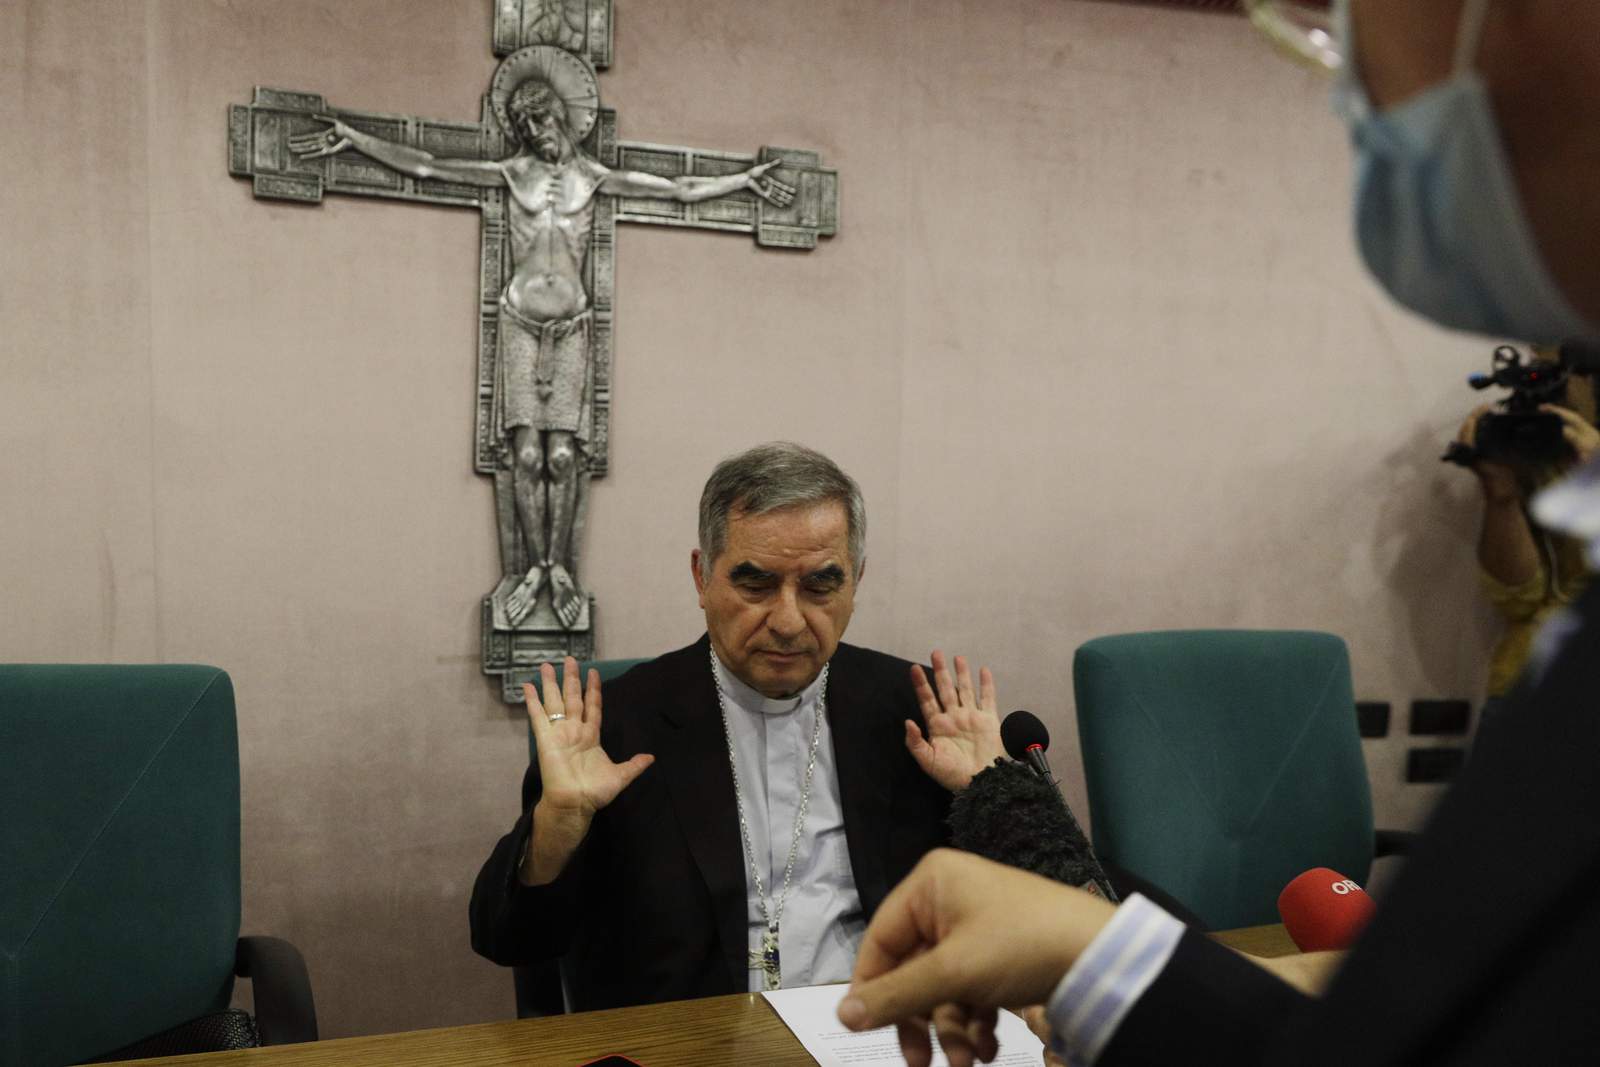 Woman close to Vatican cardinal arrested in corruption probe